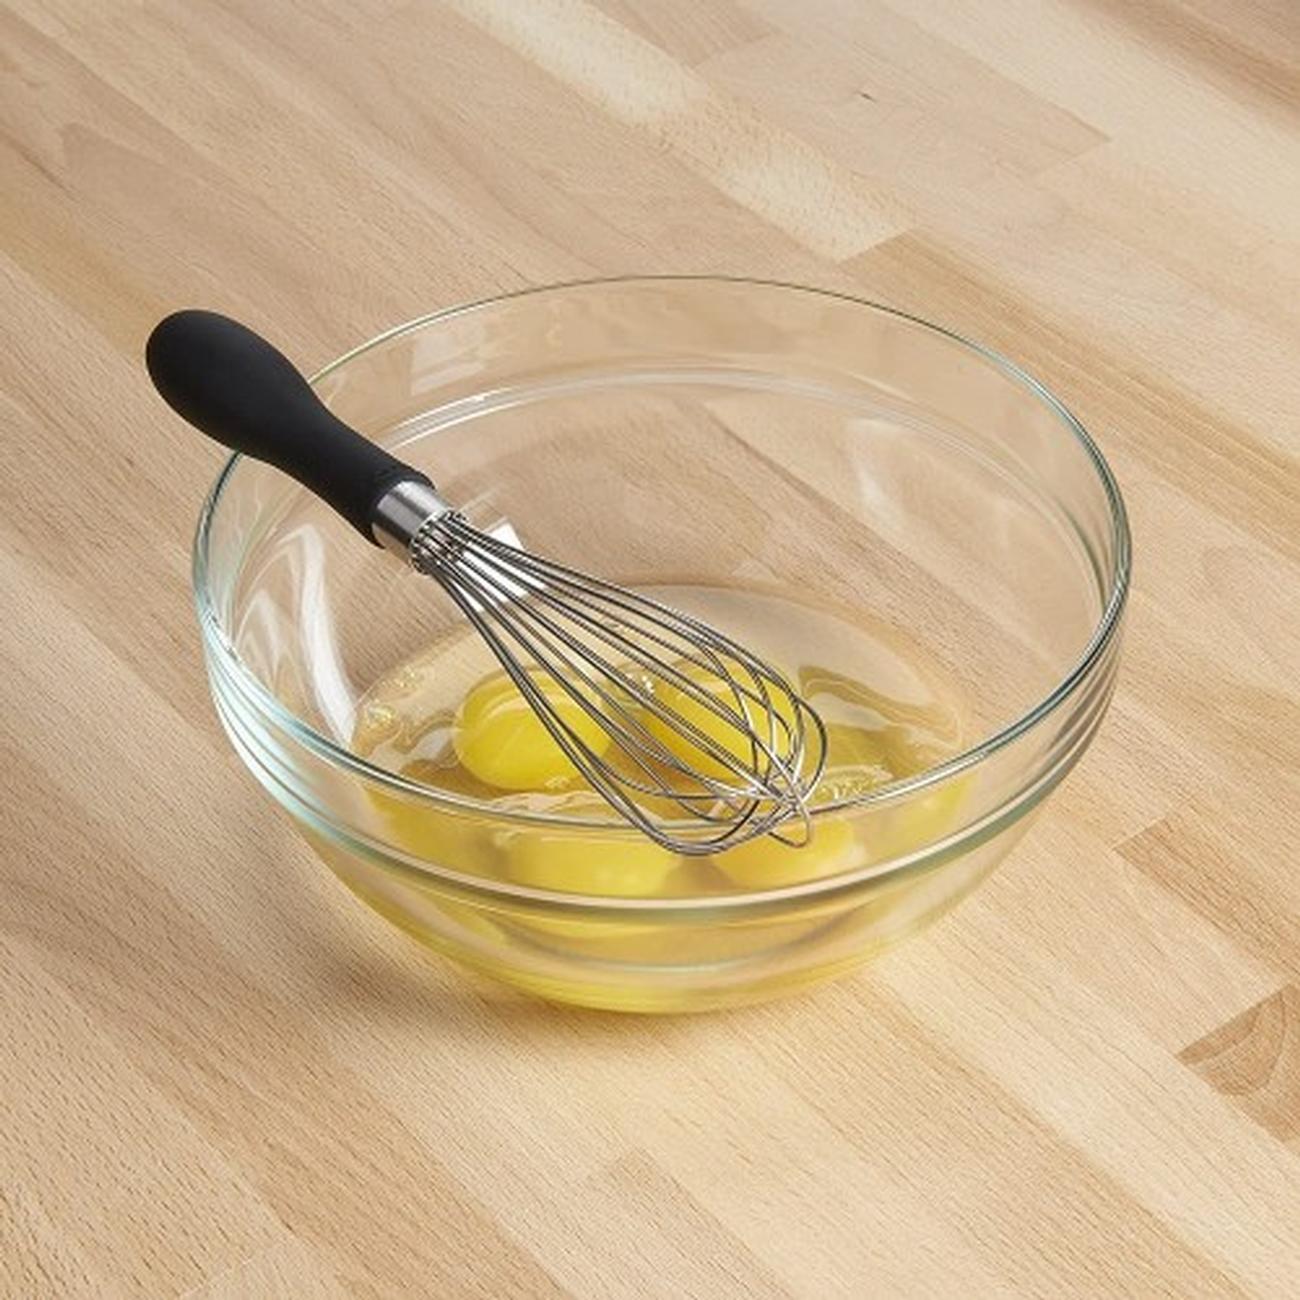 https://www.thekitchenwhisk.ie/contentfiles/productImages/Large/OXO-Small-Whisk-9-inch-Good-Grips-1.jpg